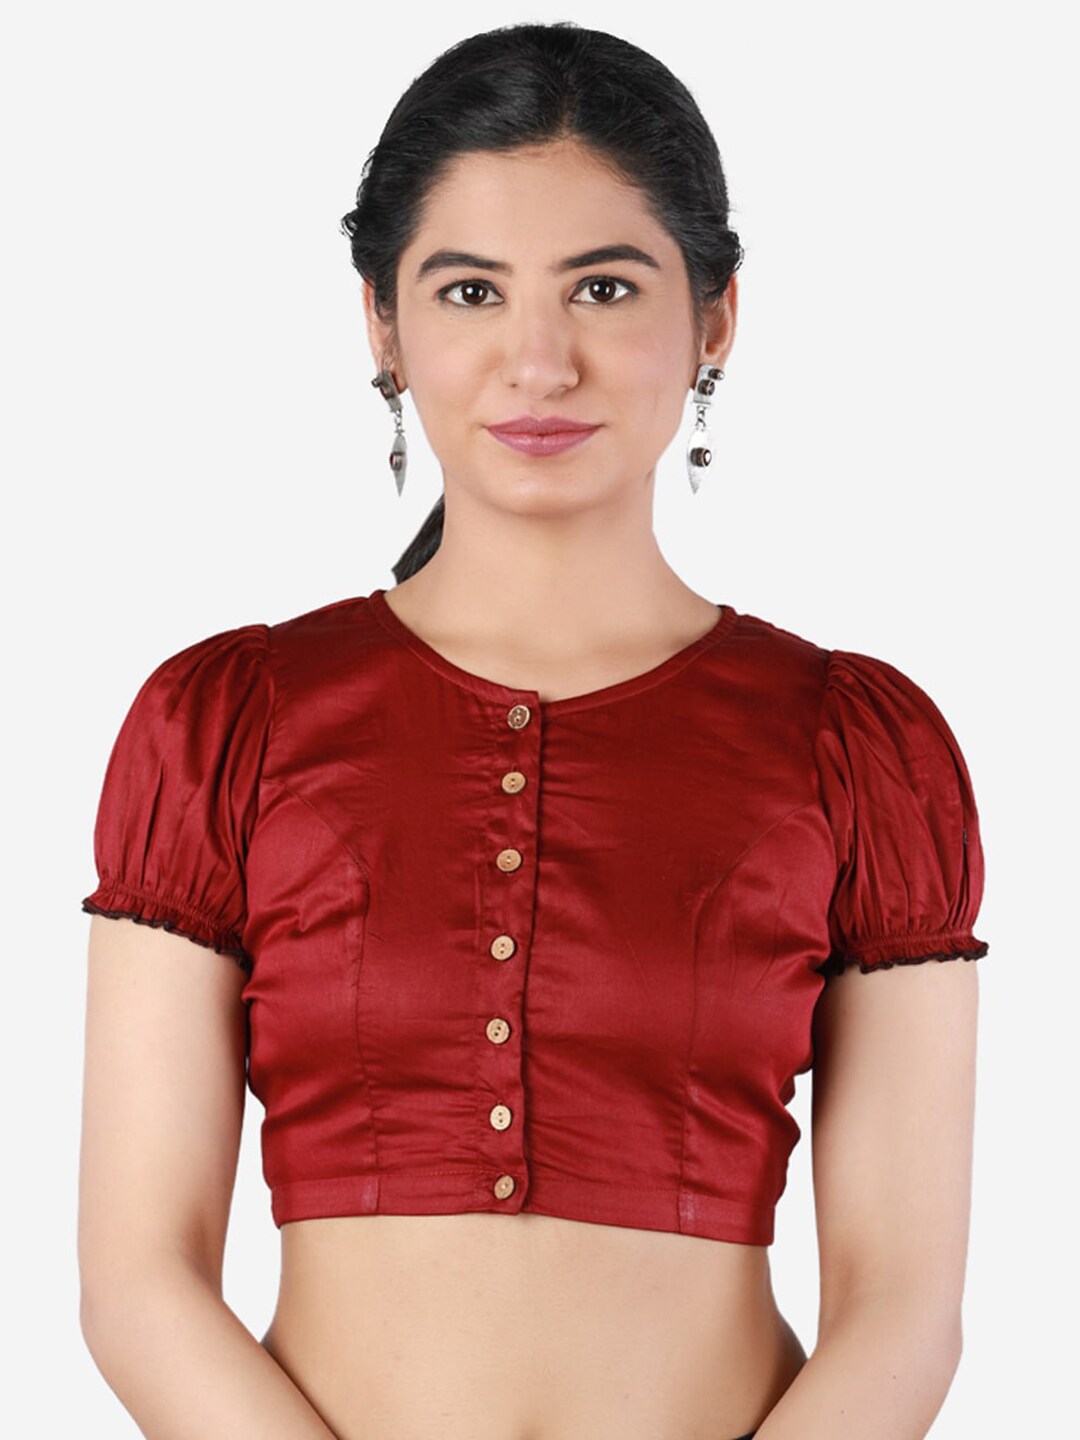 Llajja Women Maroon Solid Pure Cotton Saree Blouse Price in India